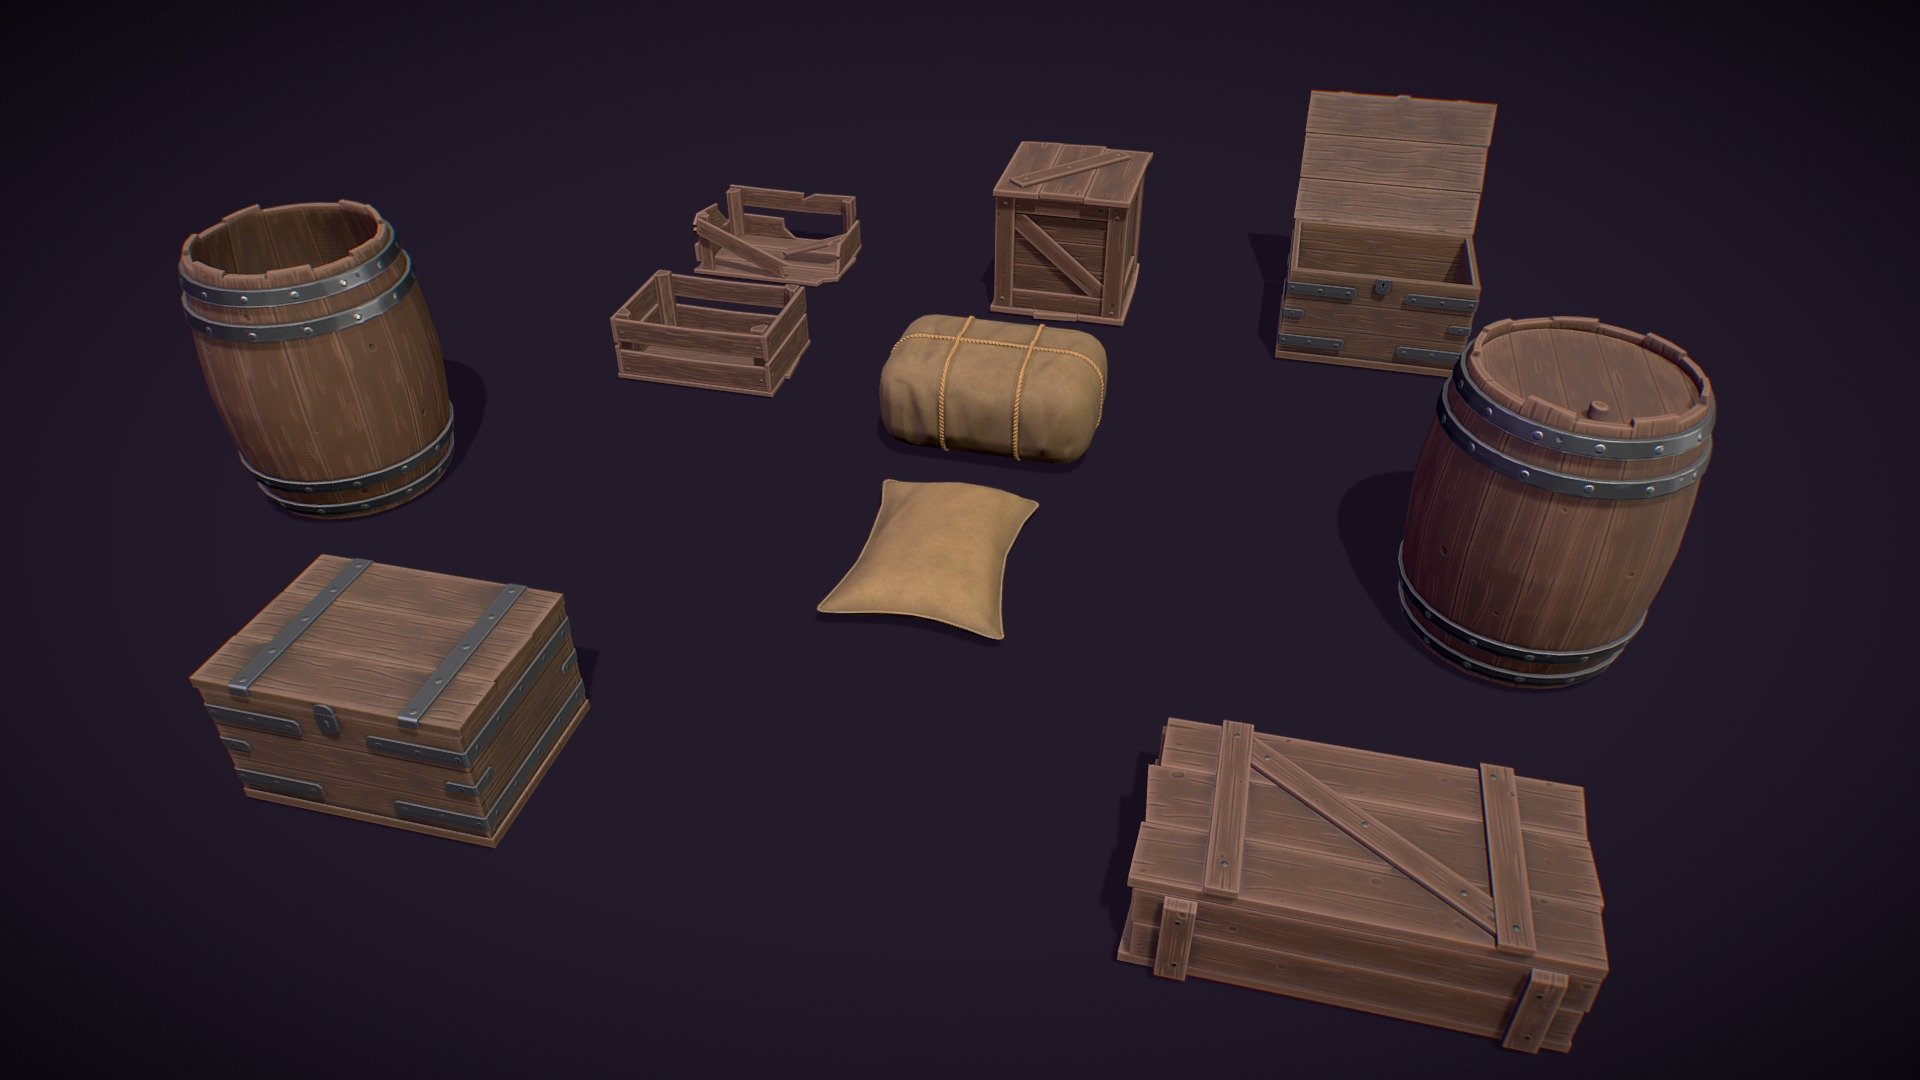 A Package of 10 Stylized Medieval Boxes, Packages, Barrels and Crates with Stylized PBR Textures.

Are you liked this Package? Feel free to take a look on my another models! Here

Features:

.Fbx, .Obj, .Uasset and .Blend files.

Low Poly Mesh game-ready.

Real-World Scale (centimeters).

Unreal Project 4.20+

Custom Collision for Unreal Engine 4 (Handmade).

Tris Count: 244 to 2,304.

Number of Textures (PNG): 45

Number of Textures (UE4/UE5): 27

Number of Materials (UE4/UE5): 2 Materials and 9 Material Instances

PBR Textures (1024x1024) and (2048x2048) (PNG).

Type of Textures: Base Color, Roughness, Metallic, Normal Map and Ambient Occlusion (PNG).

Combined RMA texture (Roughness, Metallic and Ambient Occlusion) for Unreal Engine 4 (PNG) 3d model